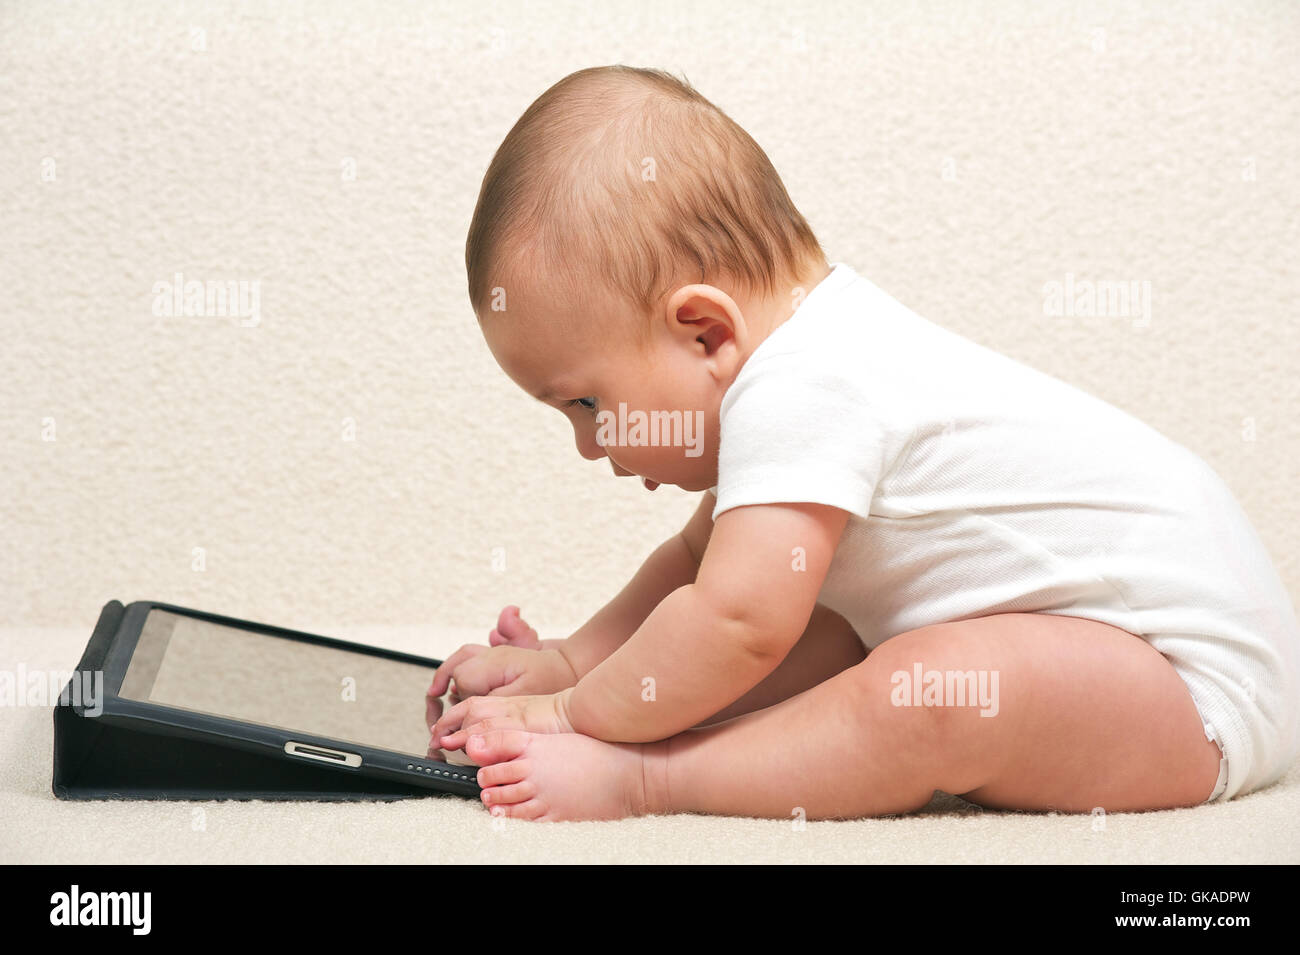 baby spilled hit computer Stock Photo